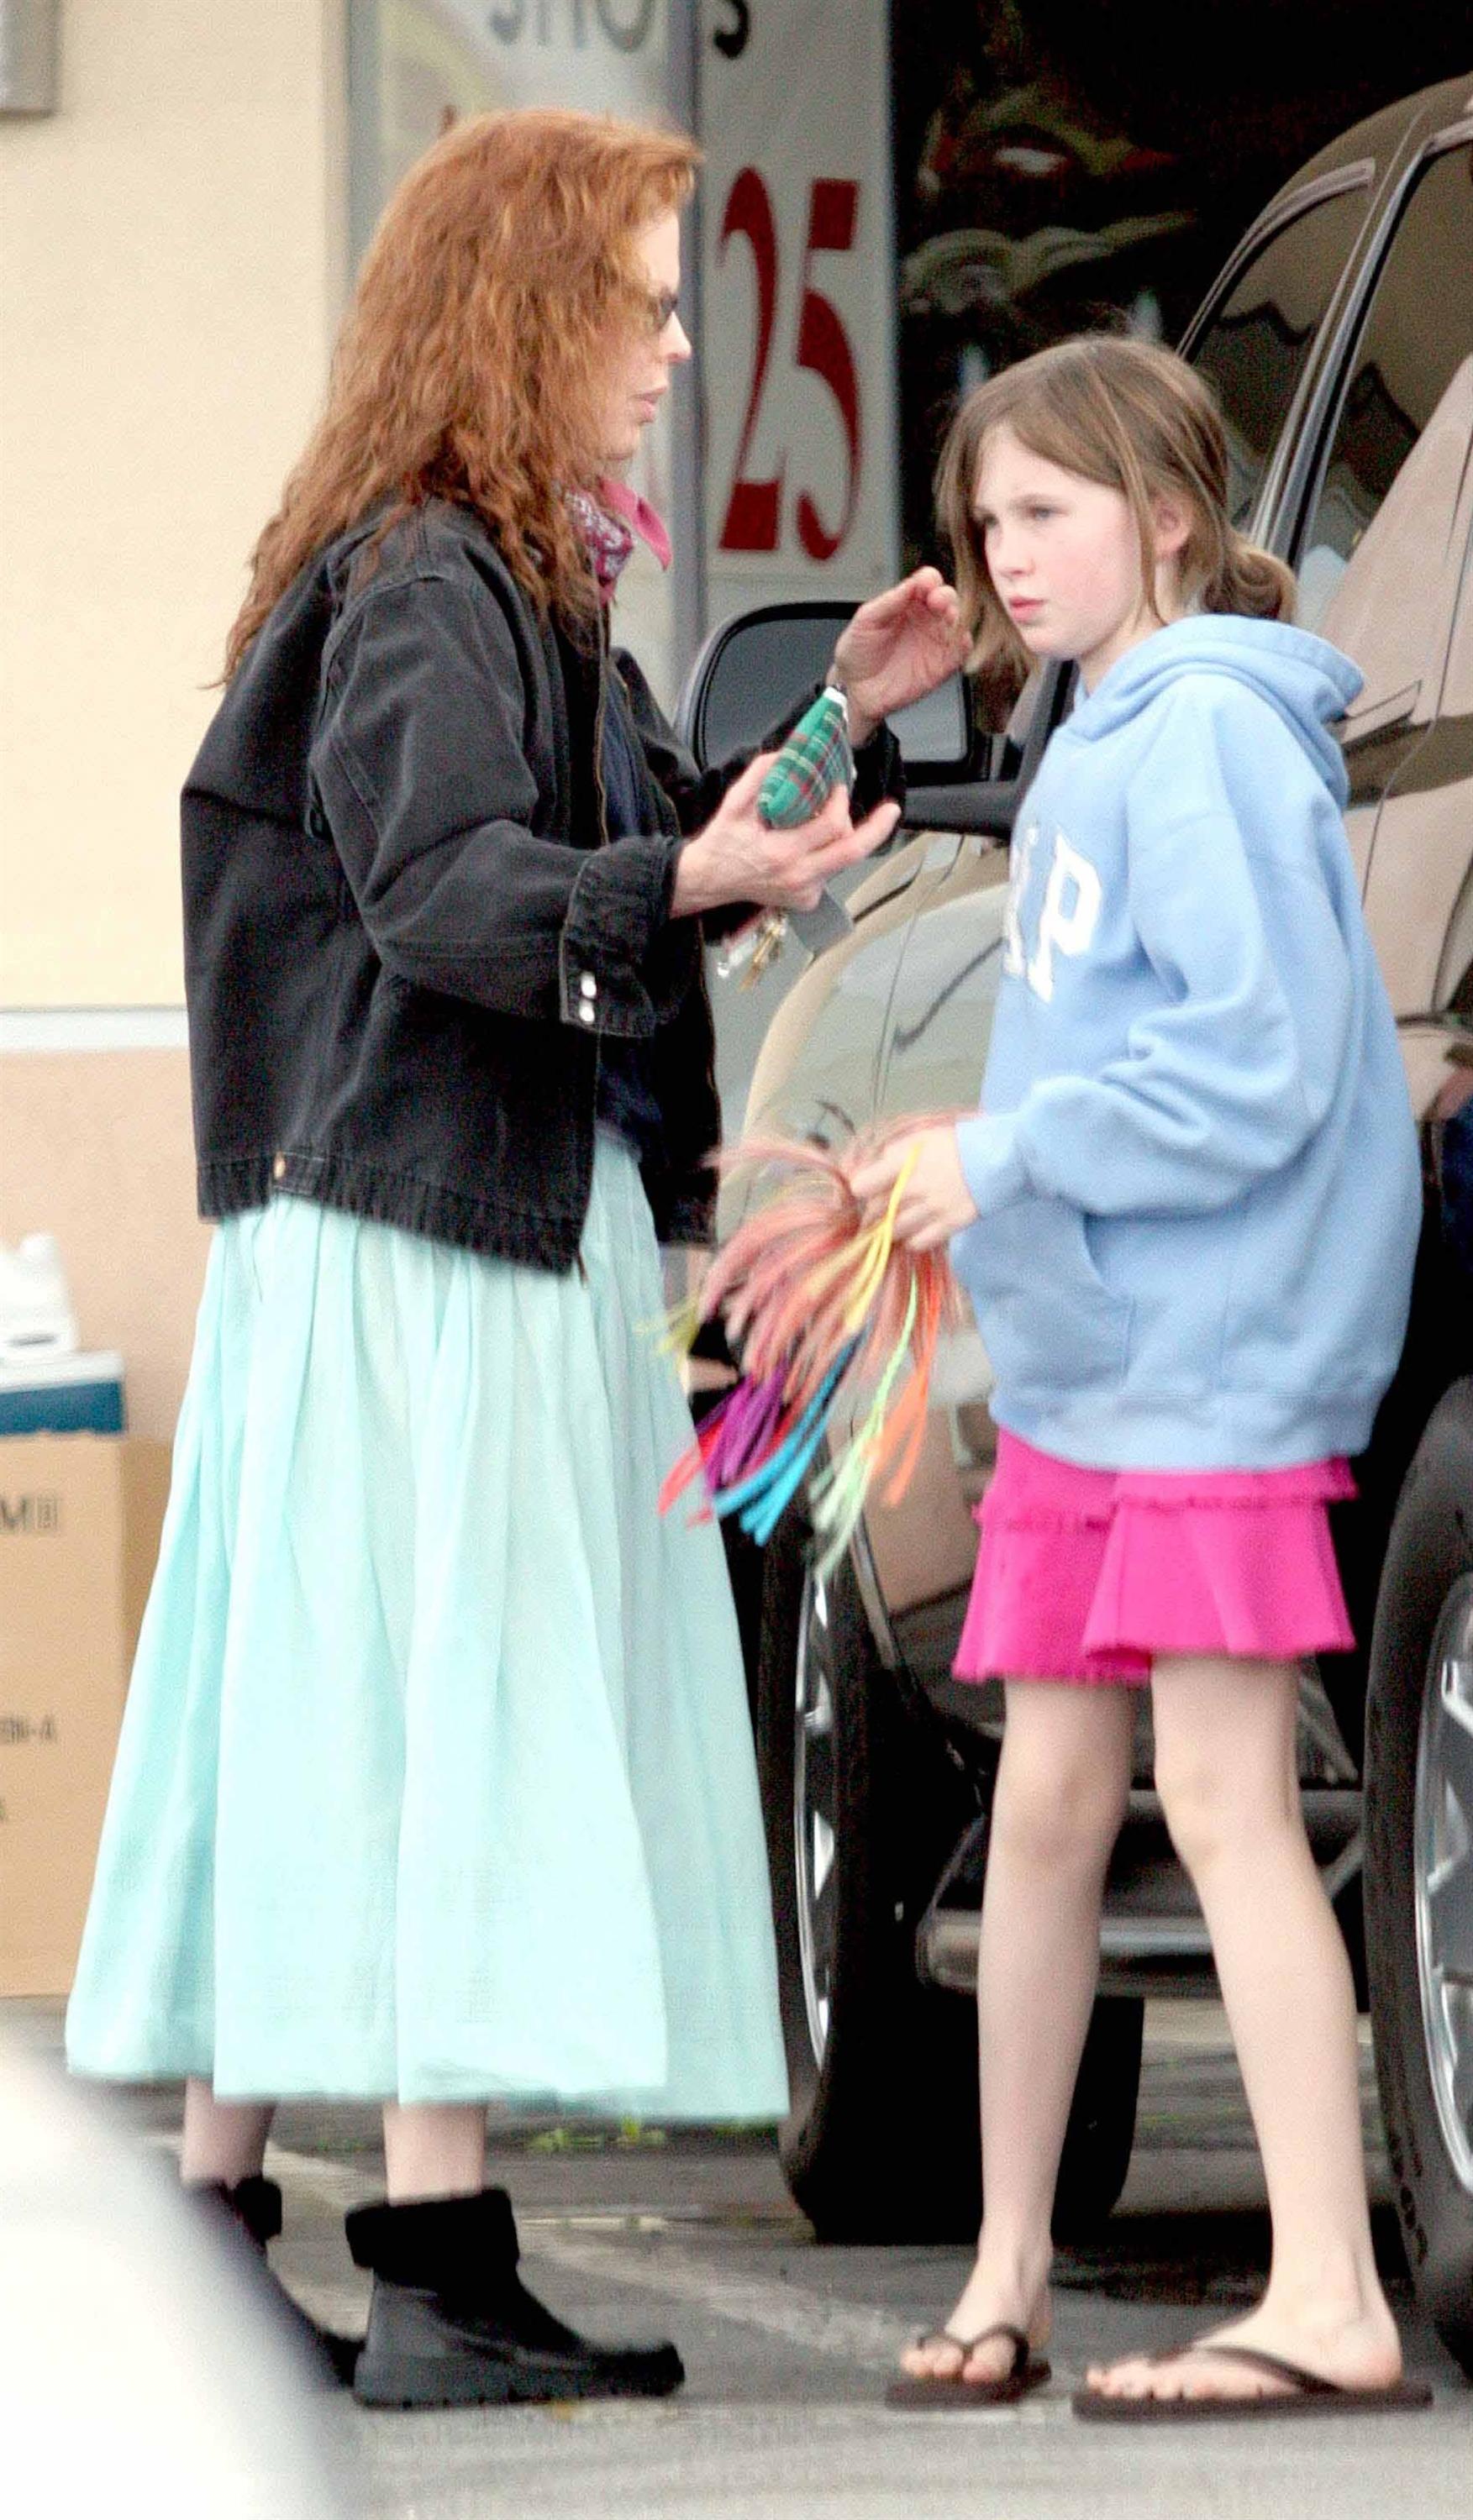 Kim Basinger with red hair and Ireland Baldwin on February 12, 2005 during Even Money shooting